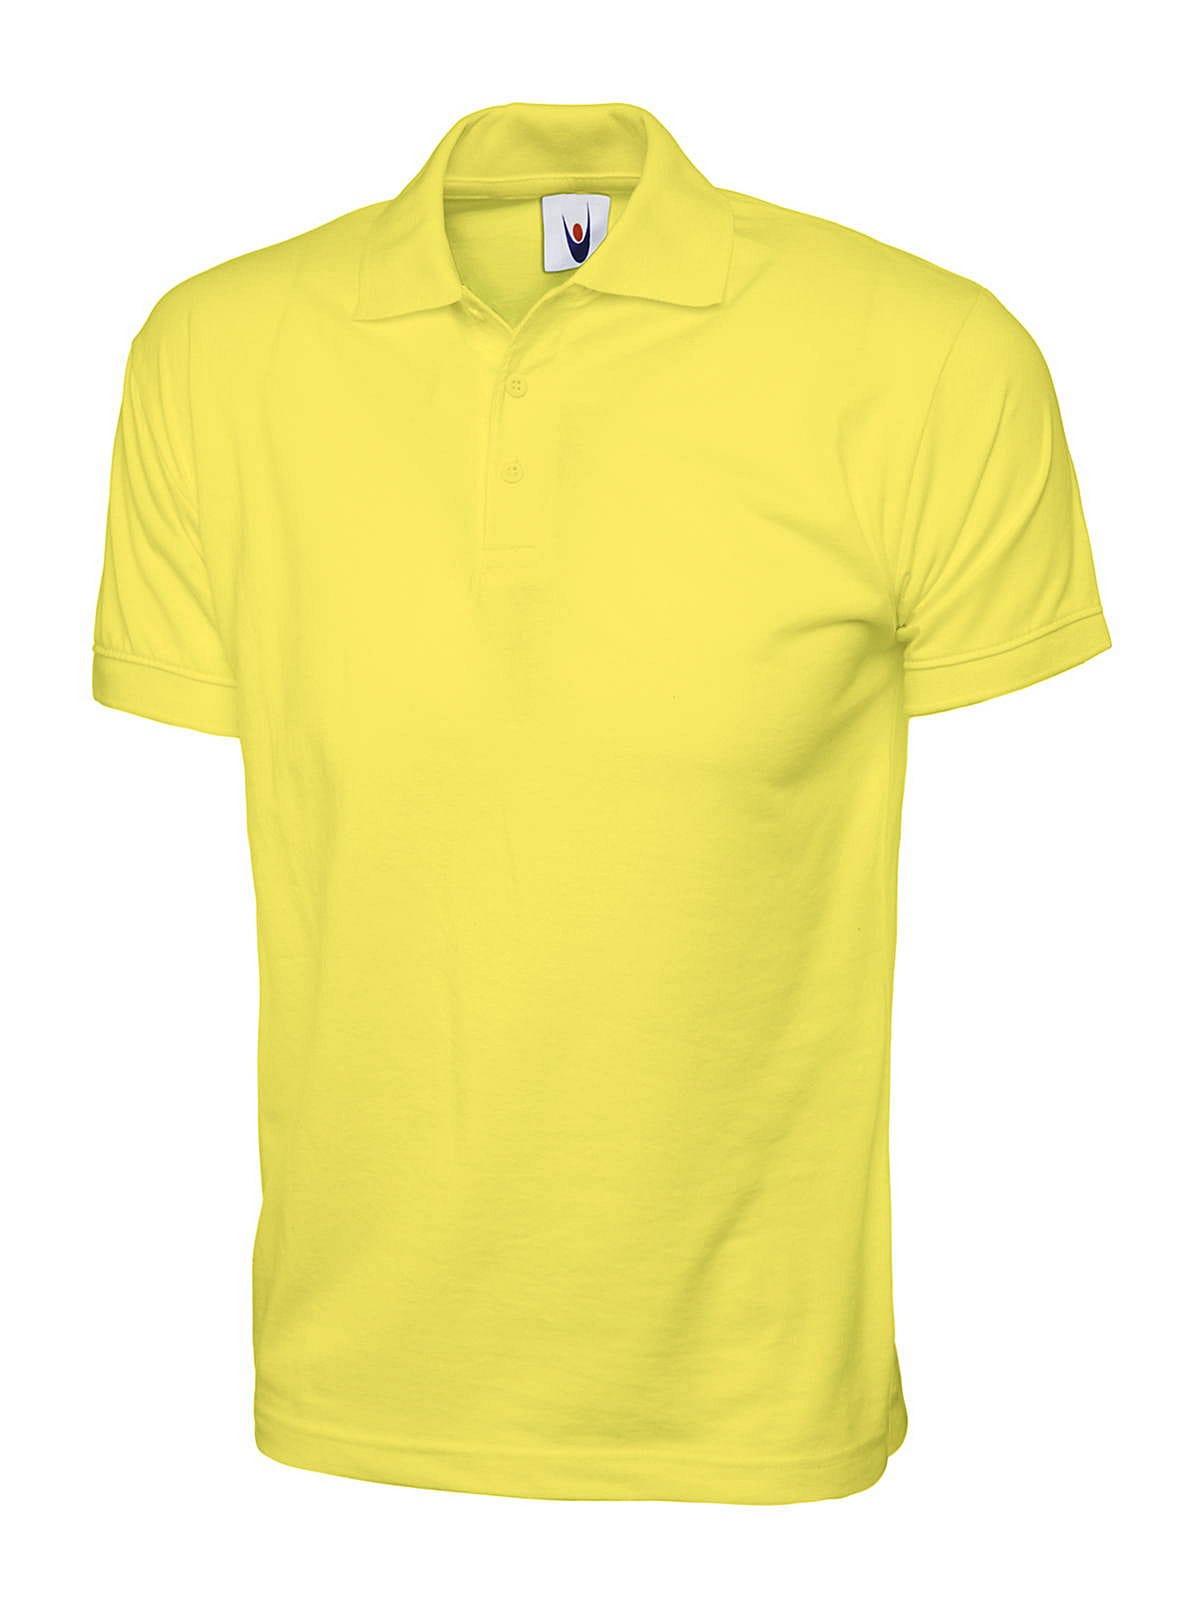 Uneek 200GSM Jersey Polo Shirt in Yellow (Product Code: UC122)